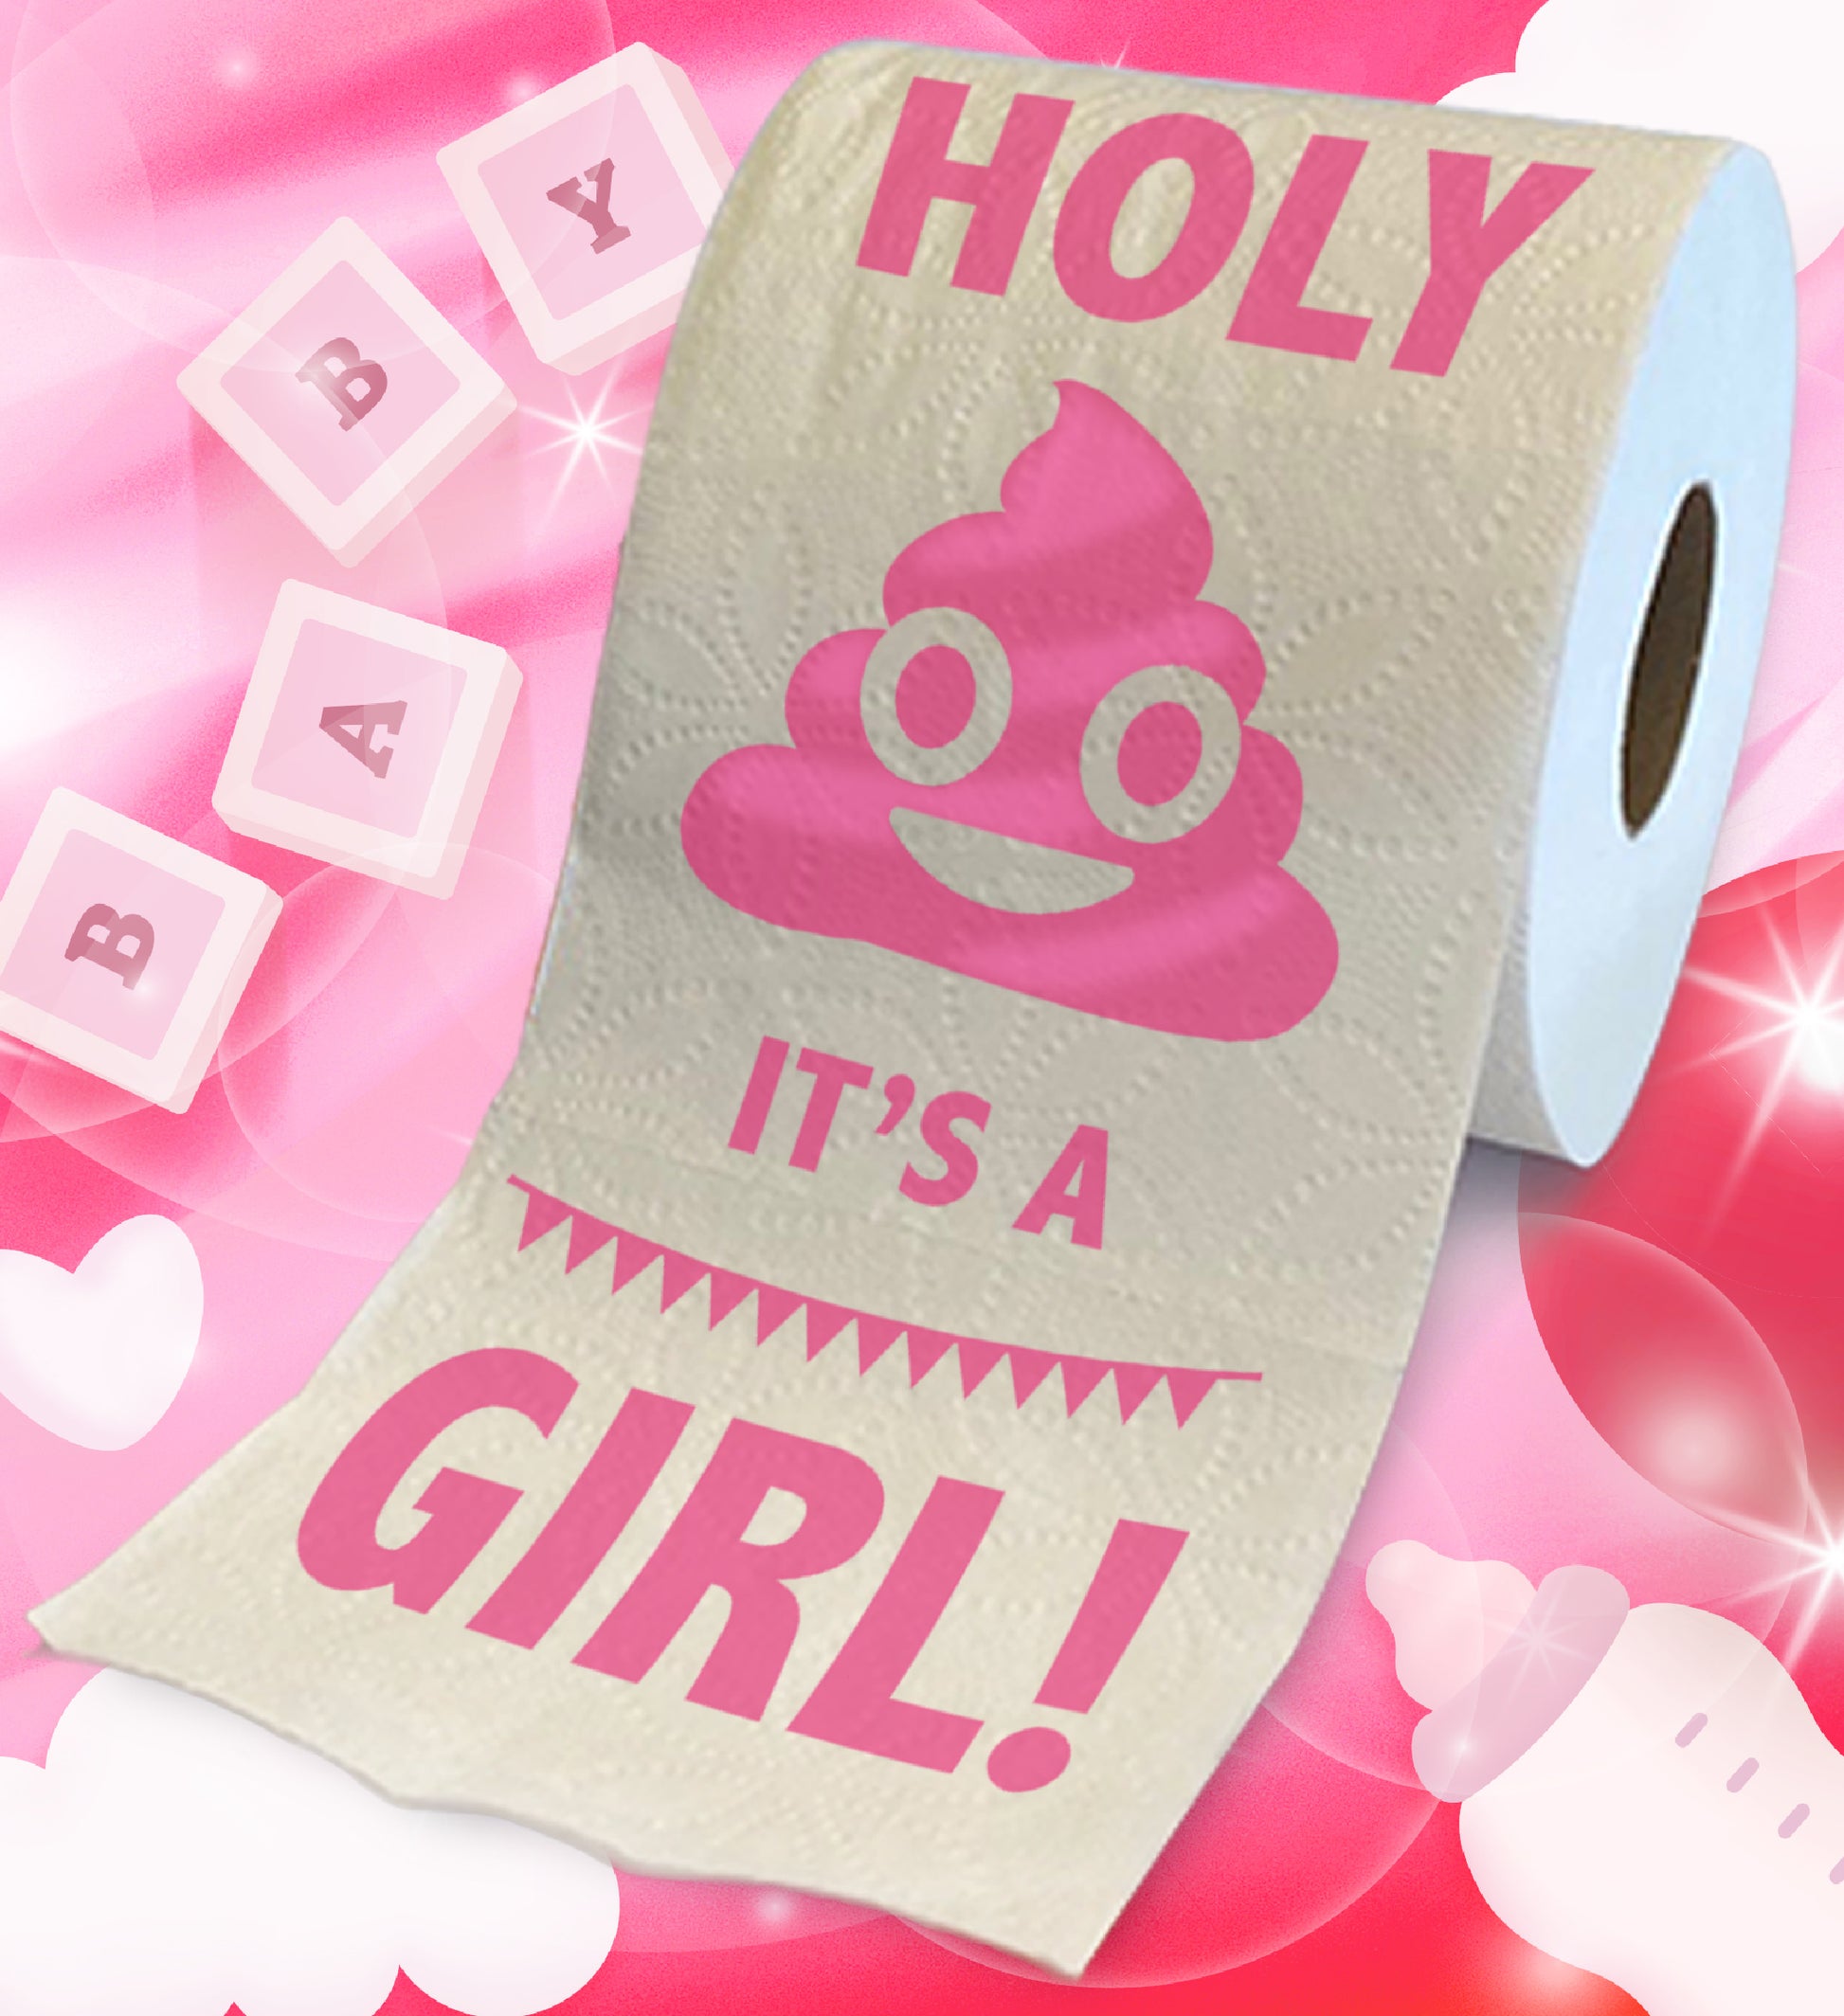 Printed TP Holy Poop It's A Girl! Printed Toilet Paper Gag Gift – Funny Roll for Girl Baby Shower Party Favors, Prank, Gender Reveal, Novelty